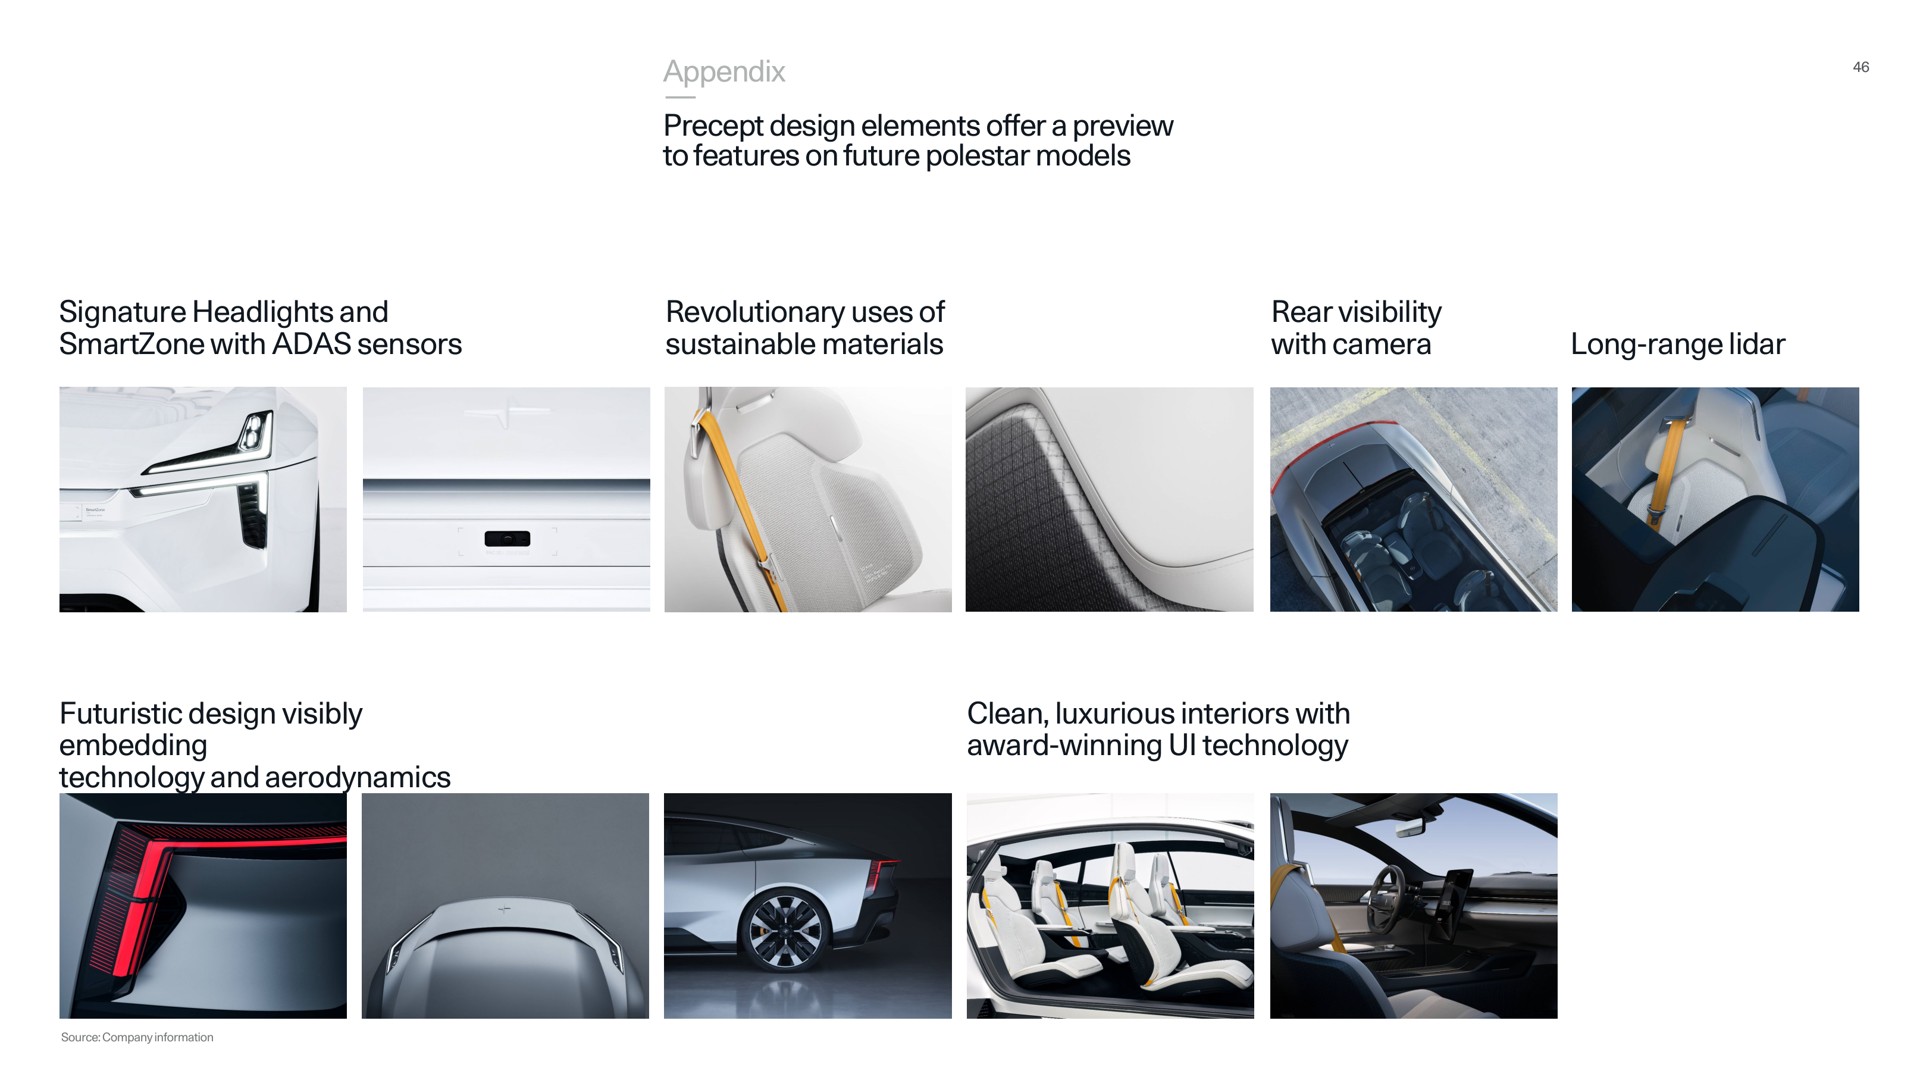 appendix precept design elements offer a preview to features on future polestar models signature headlights and with sensors revolutionary uses of sustainable materials rear visibility with camera long range futuristic design visibly embedding technology and aerodynamics clean luxurious interiors with award winning technology | Polestar